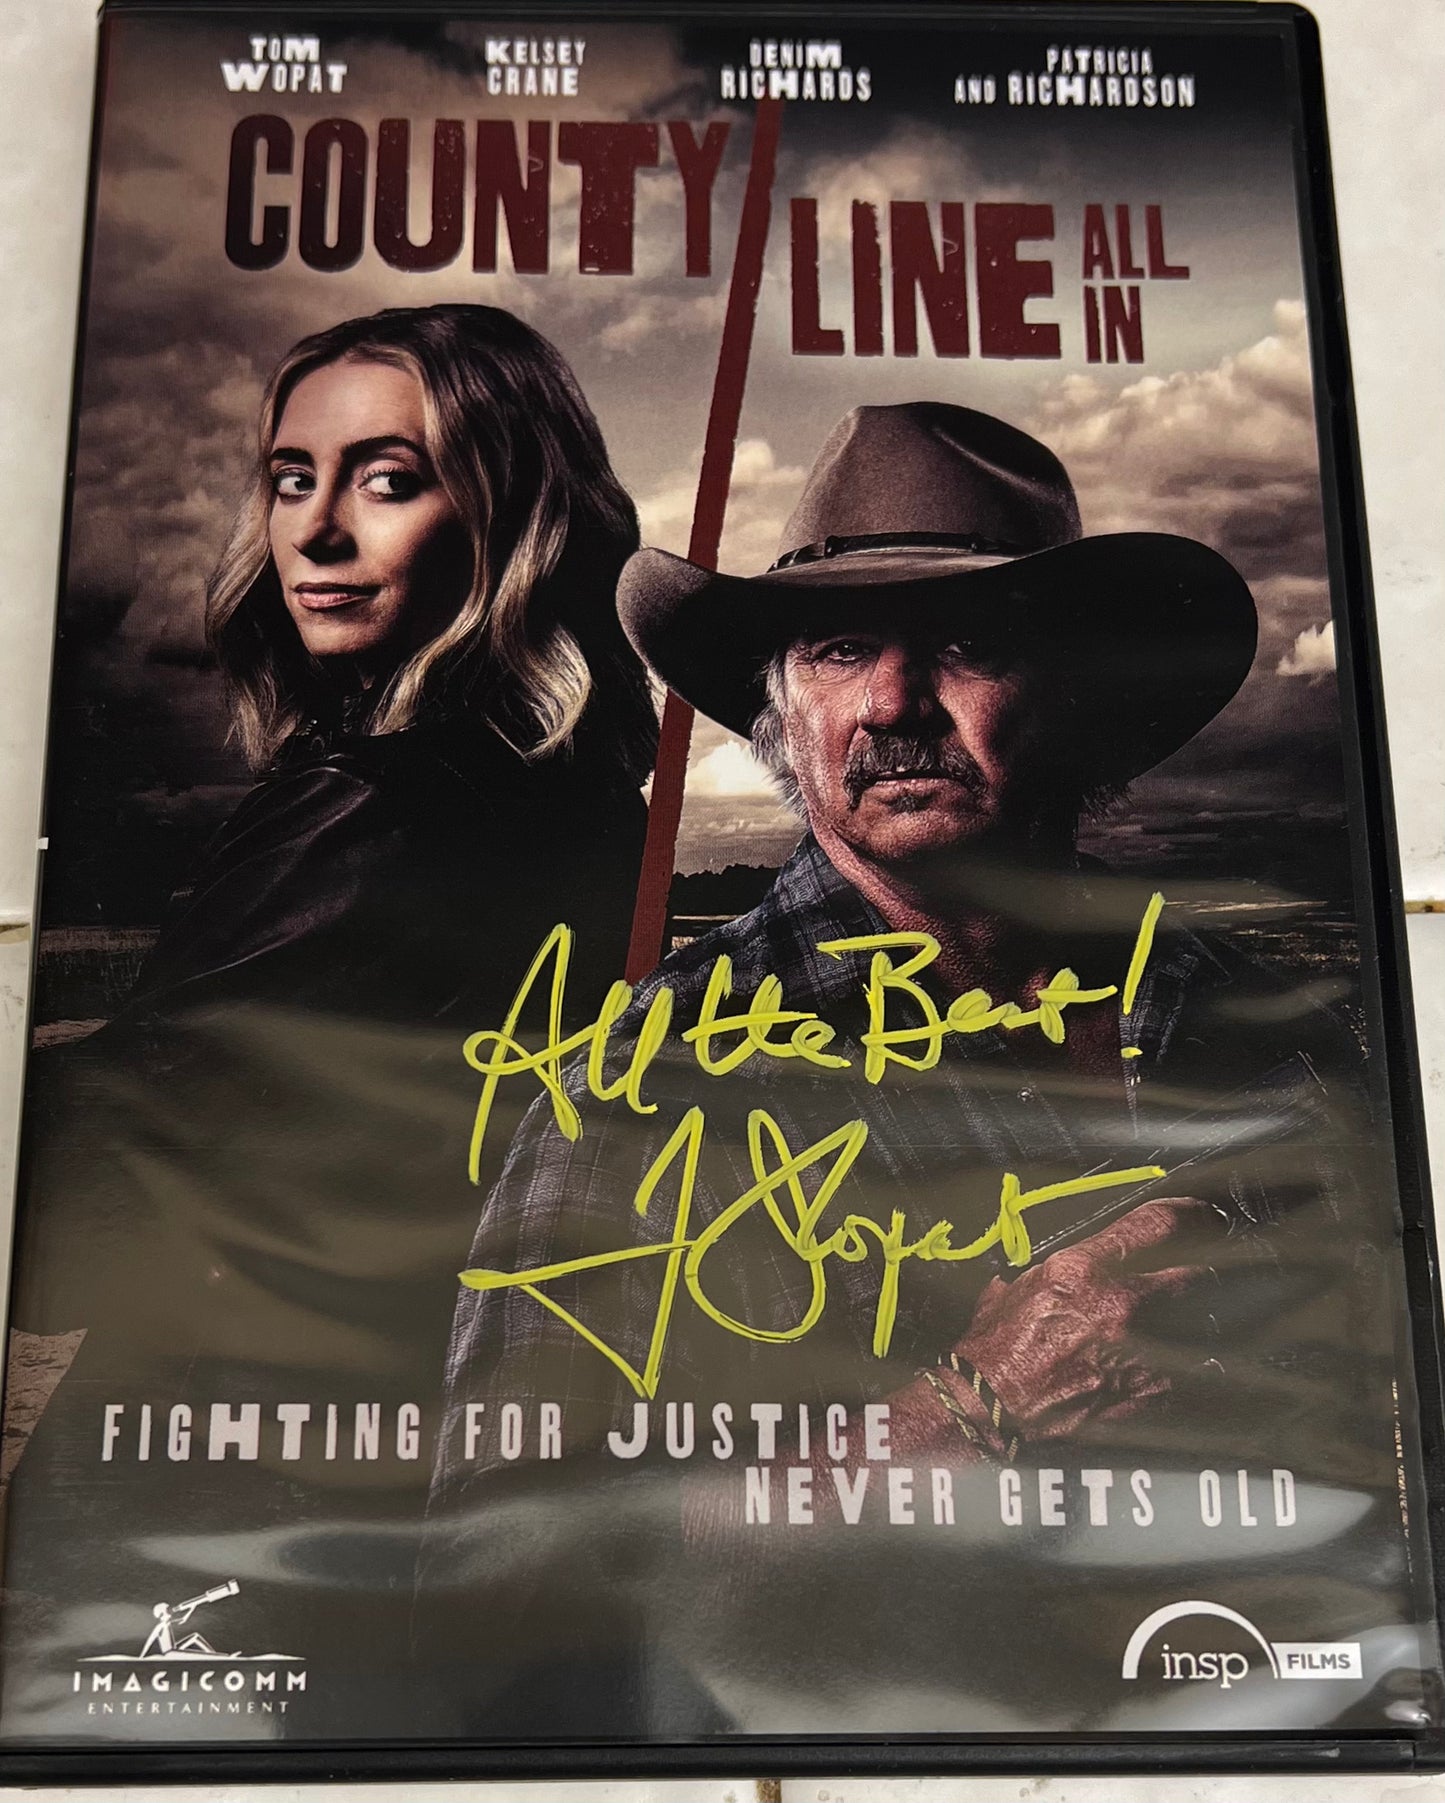 County Line: All In DVD (Signed)